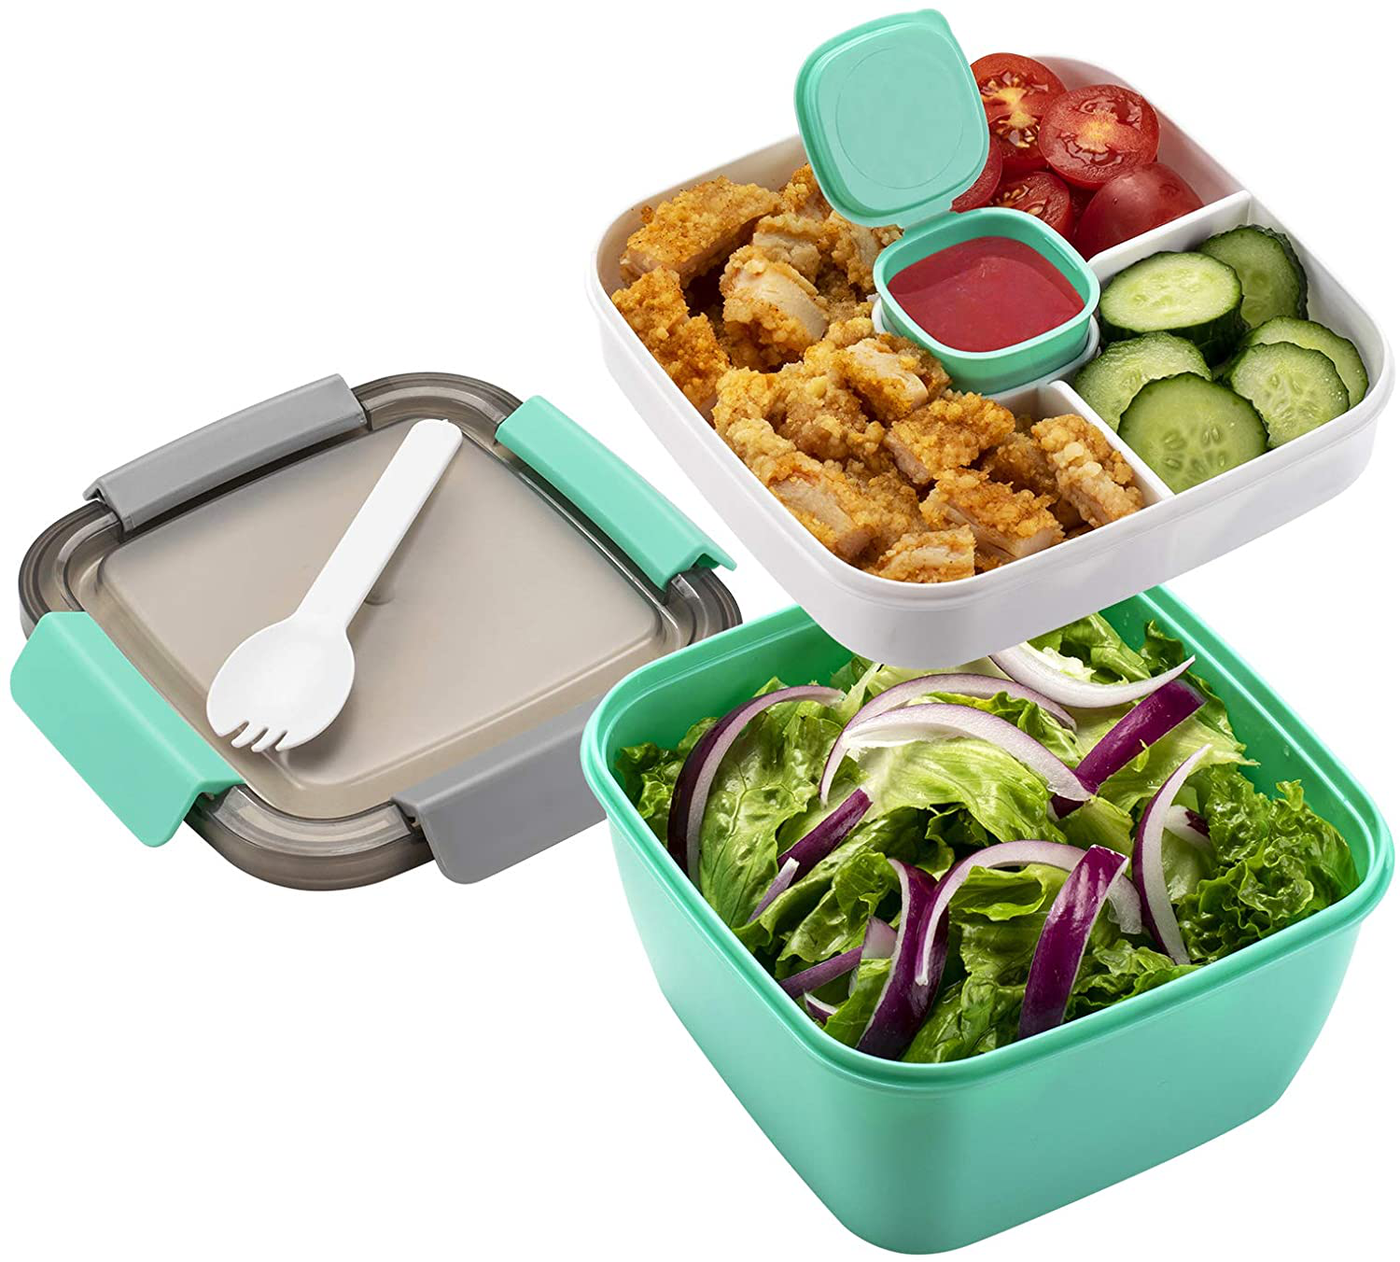 Freshmage Salad Lunch Container To Go, 52-oz Salad Bowls with 3 Compartments, Salad Dressings Container for Salad Toppings, Snacks, Men, Women (Green)